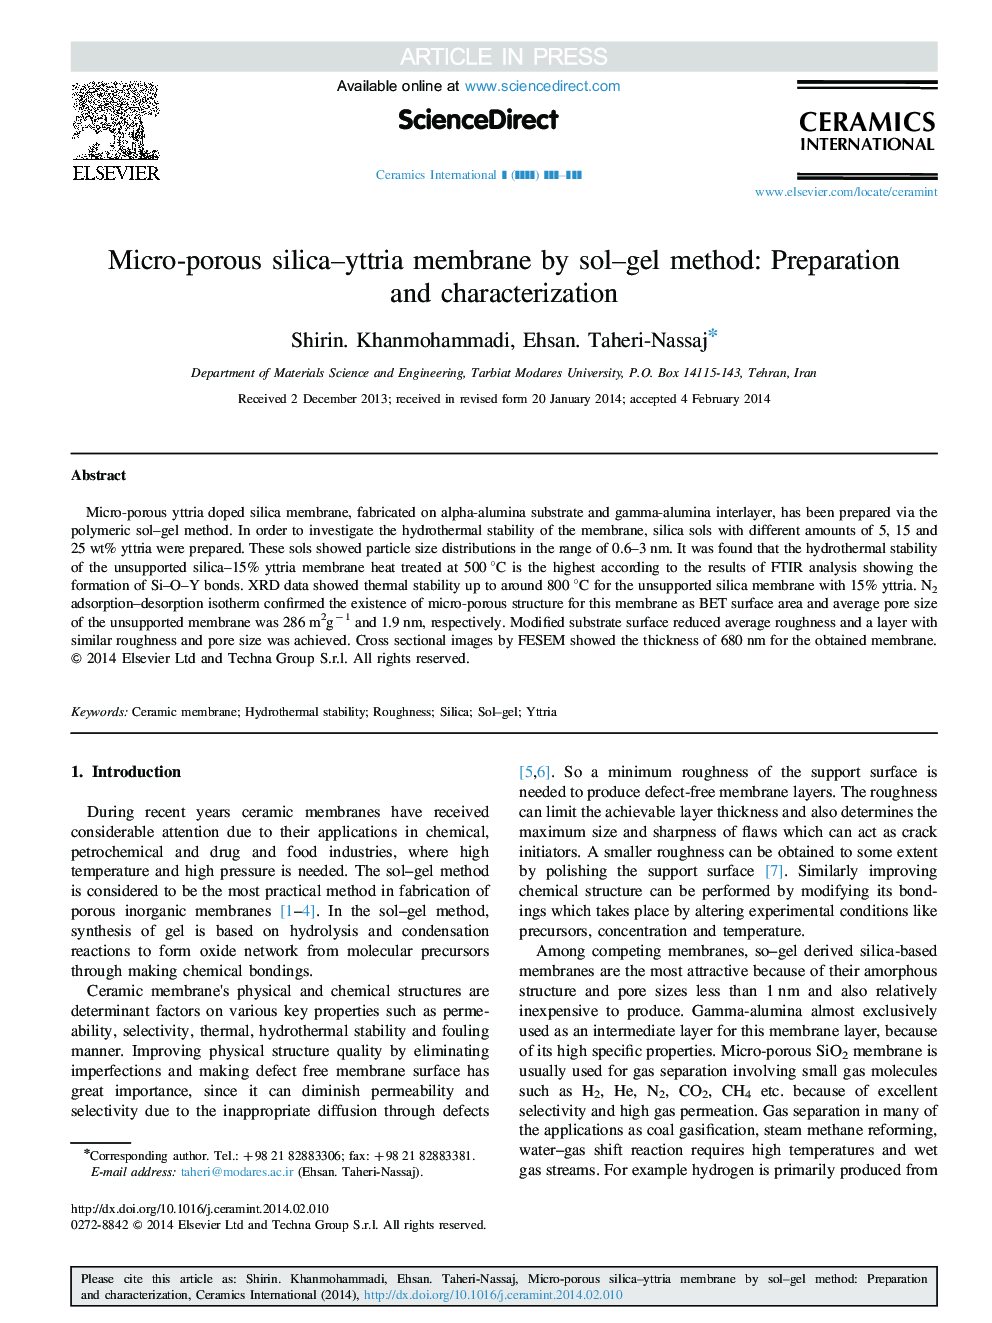 Micro-porous silica-yttria membrane by sol-gel method: Preparation and characterization